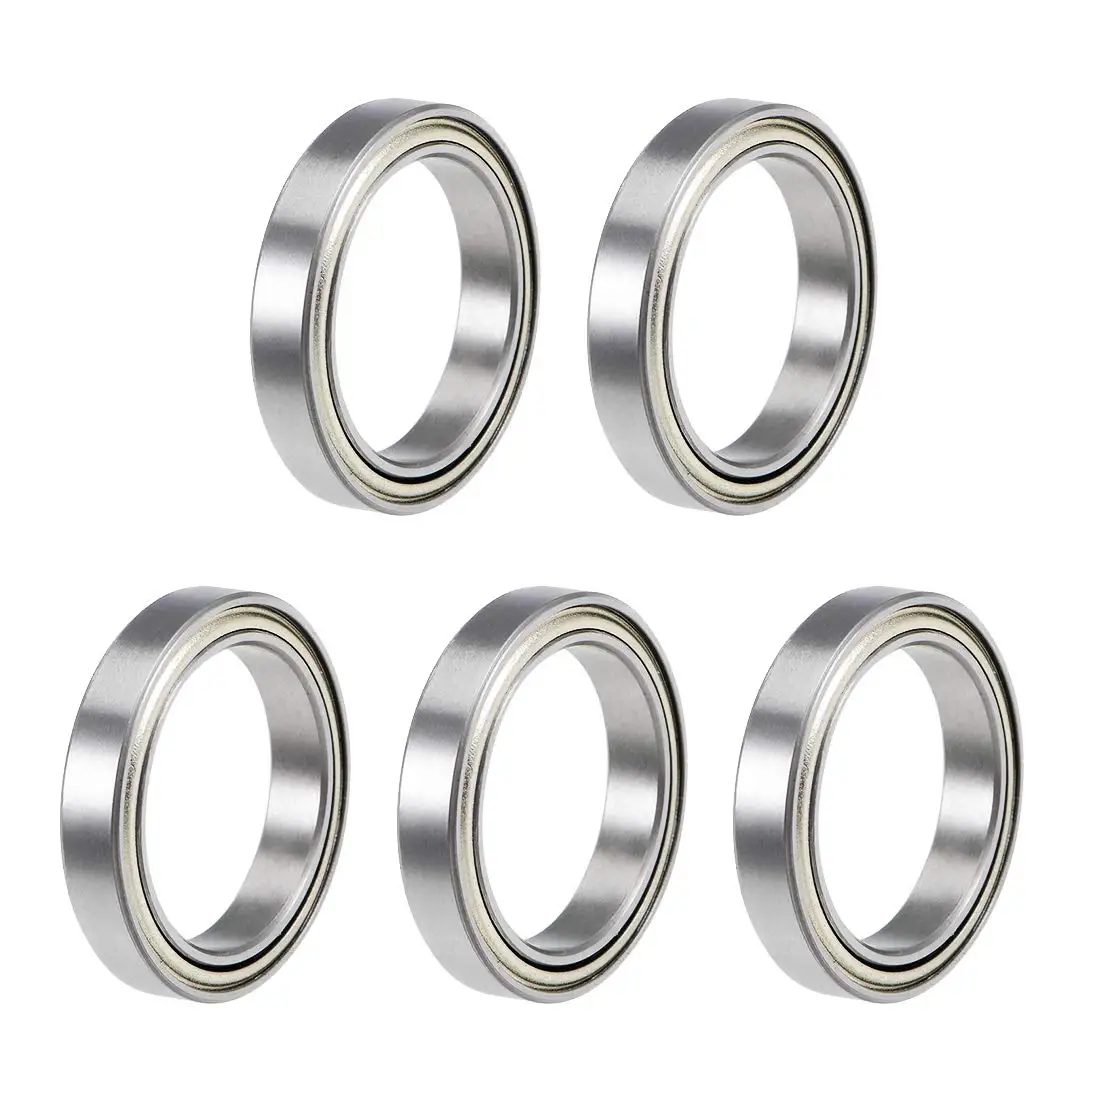 

Hot Sale 6703 6703zz 6700 6701 6702 6706 6704 6705 Precision Section Deep Groove Ball Bearing